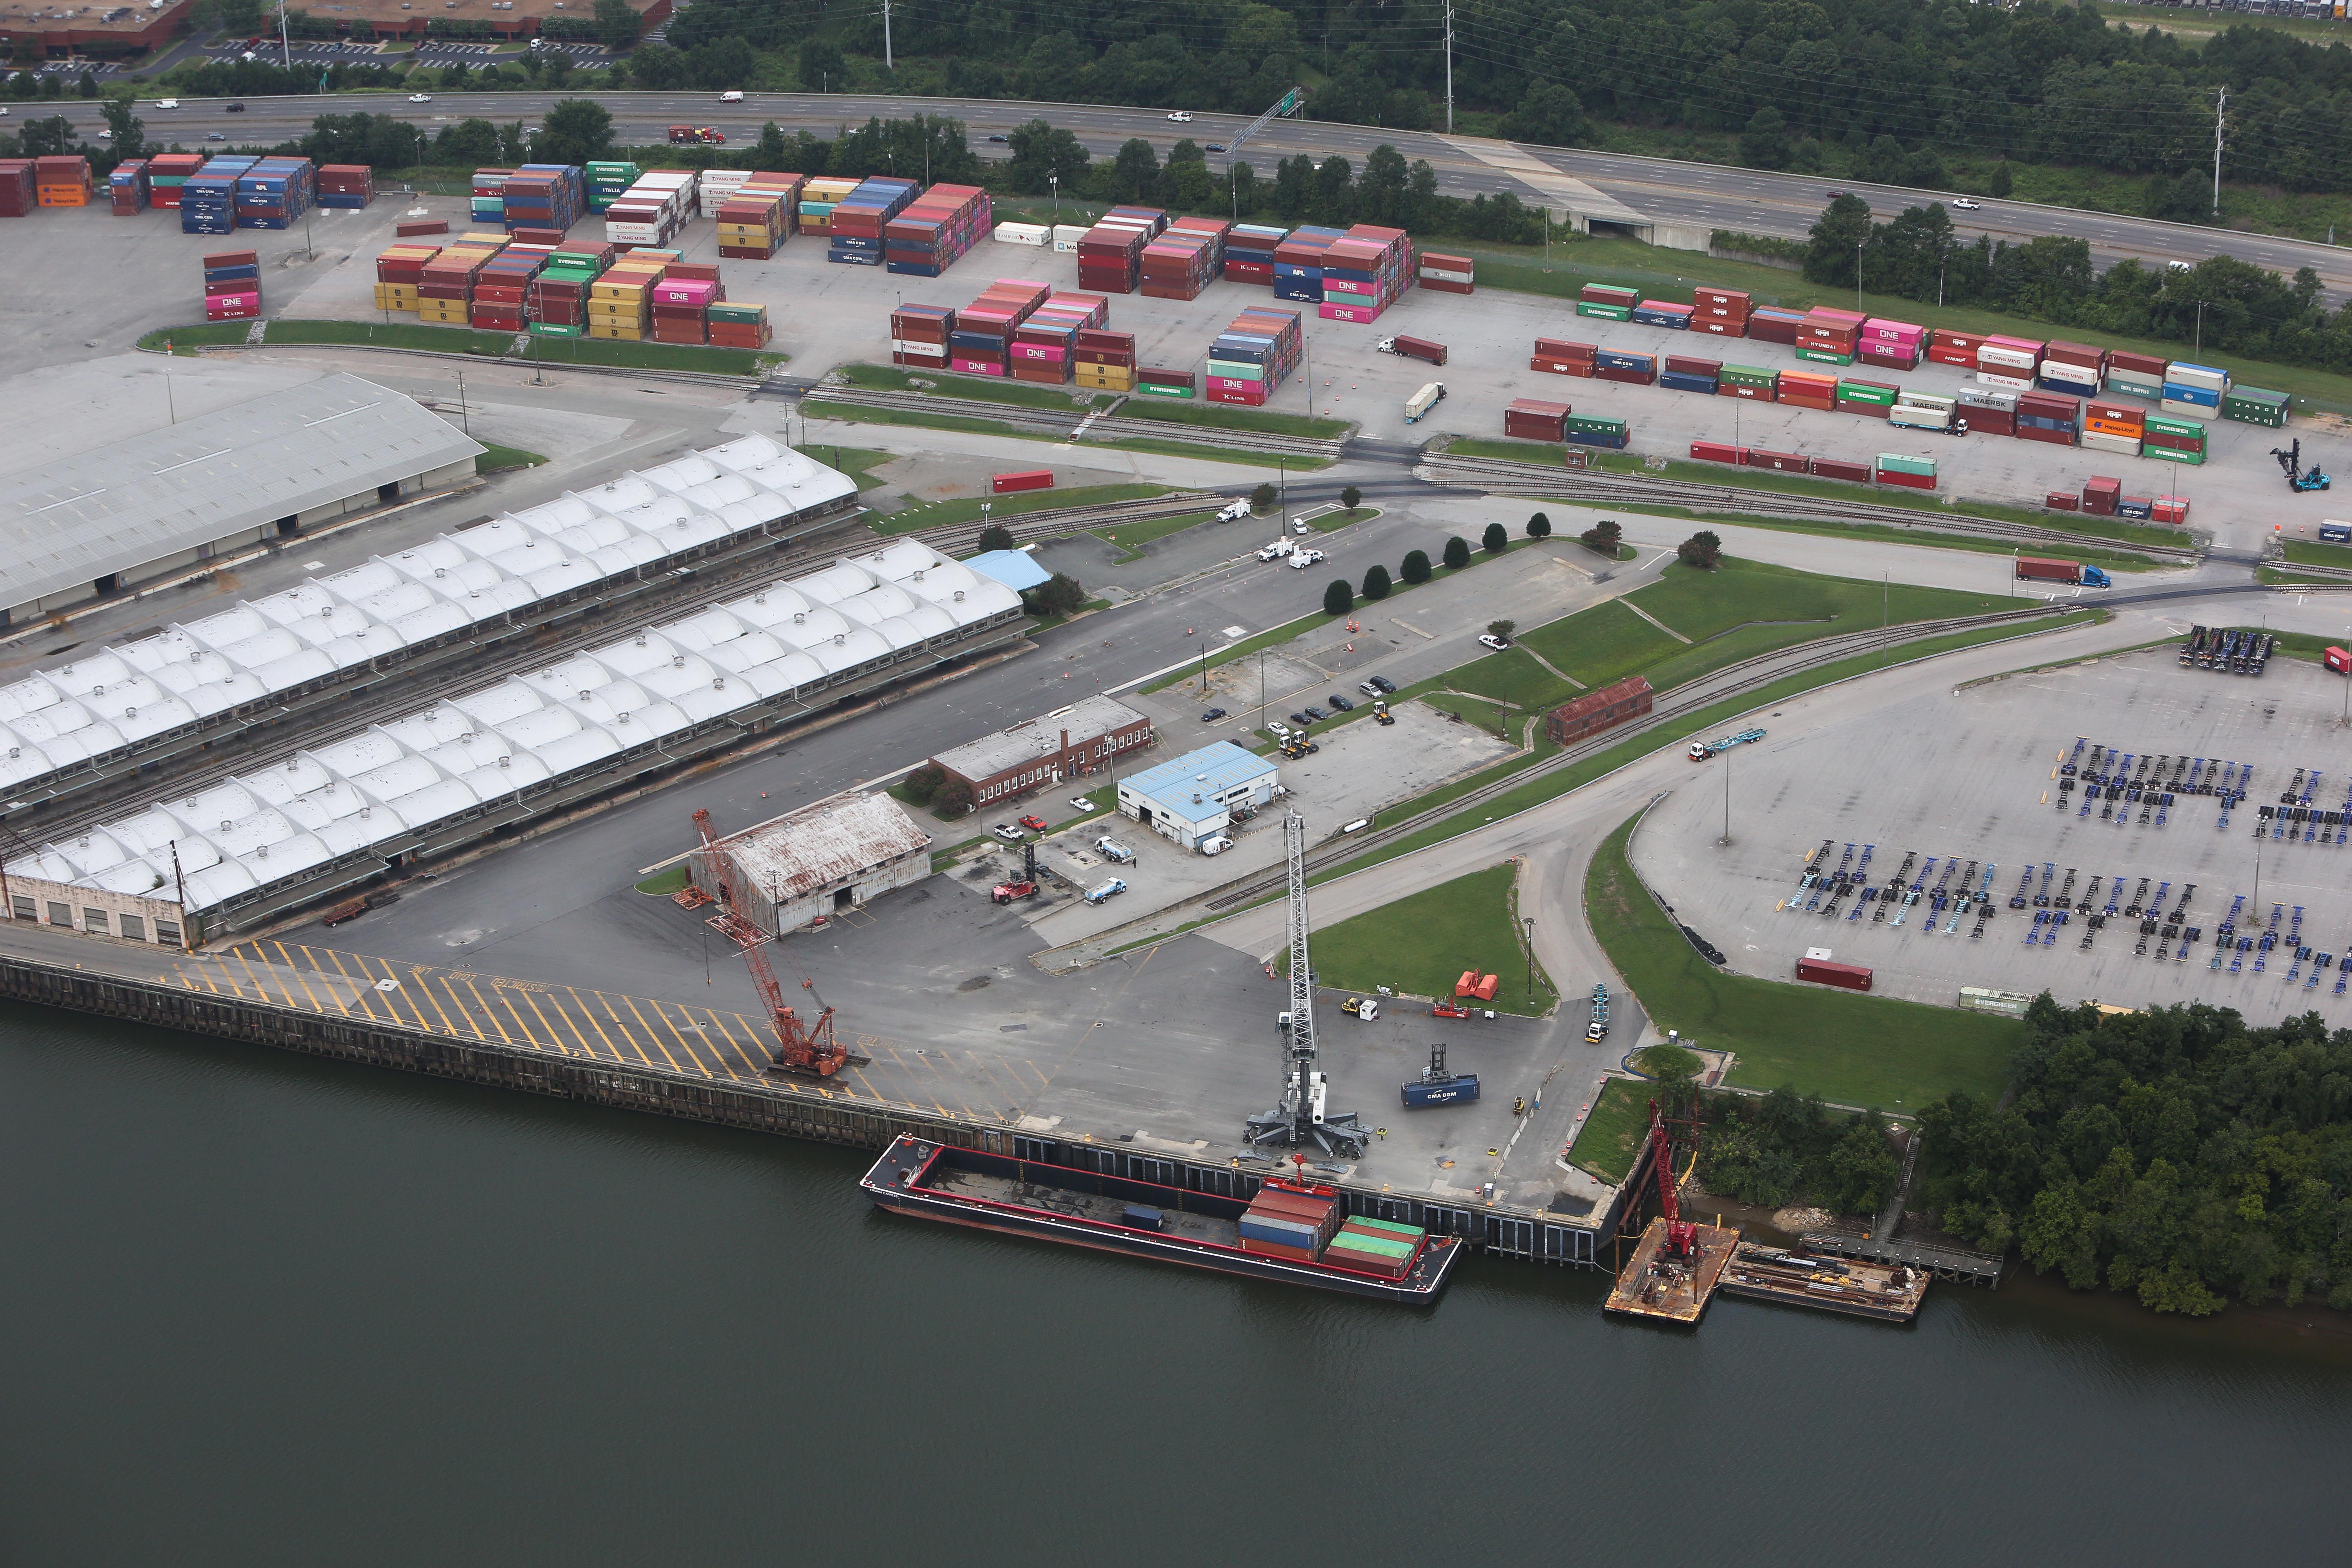 The Port of Virginia's Marine Terminal (RMT) is located adjacent to Interstate 95. RMT provides a maritime alternative to Interstate 64 by transporting goods on the James River via barges, removing container traffic from local roads and highways.